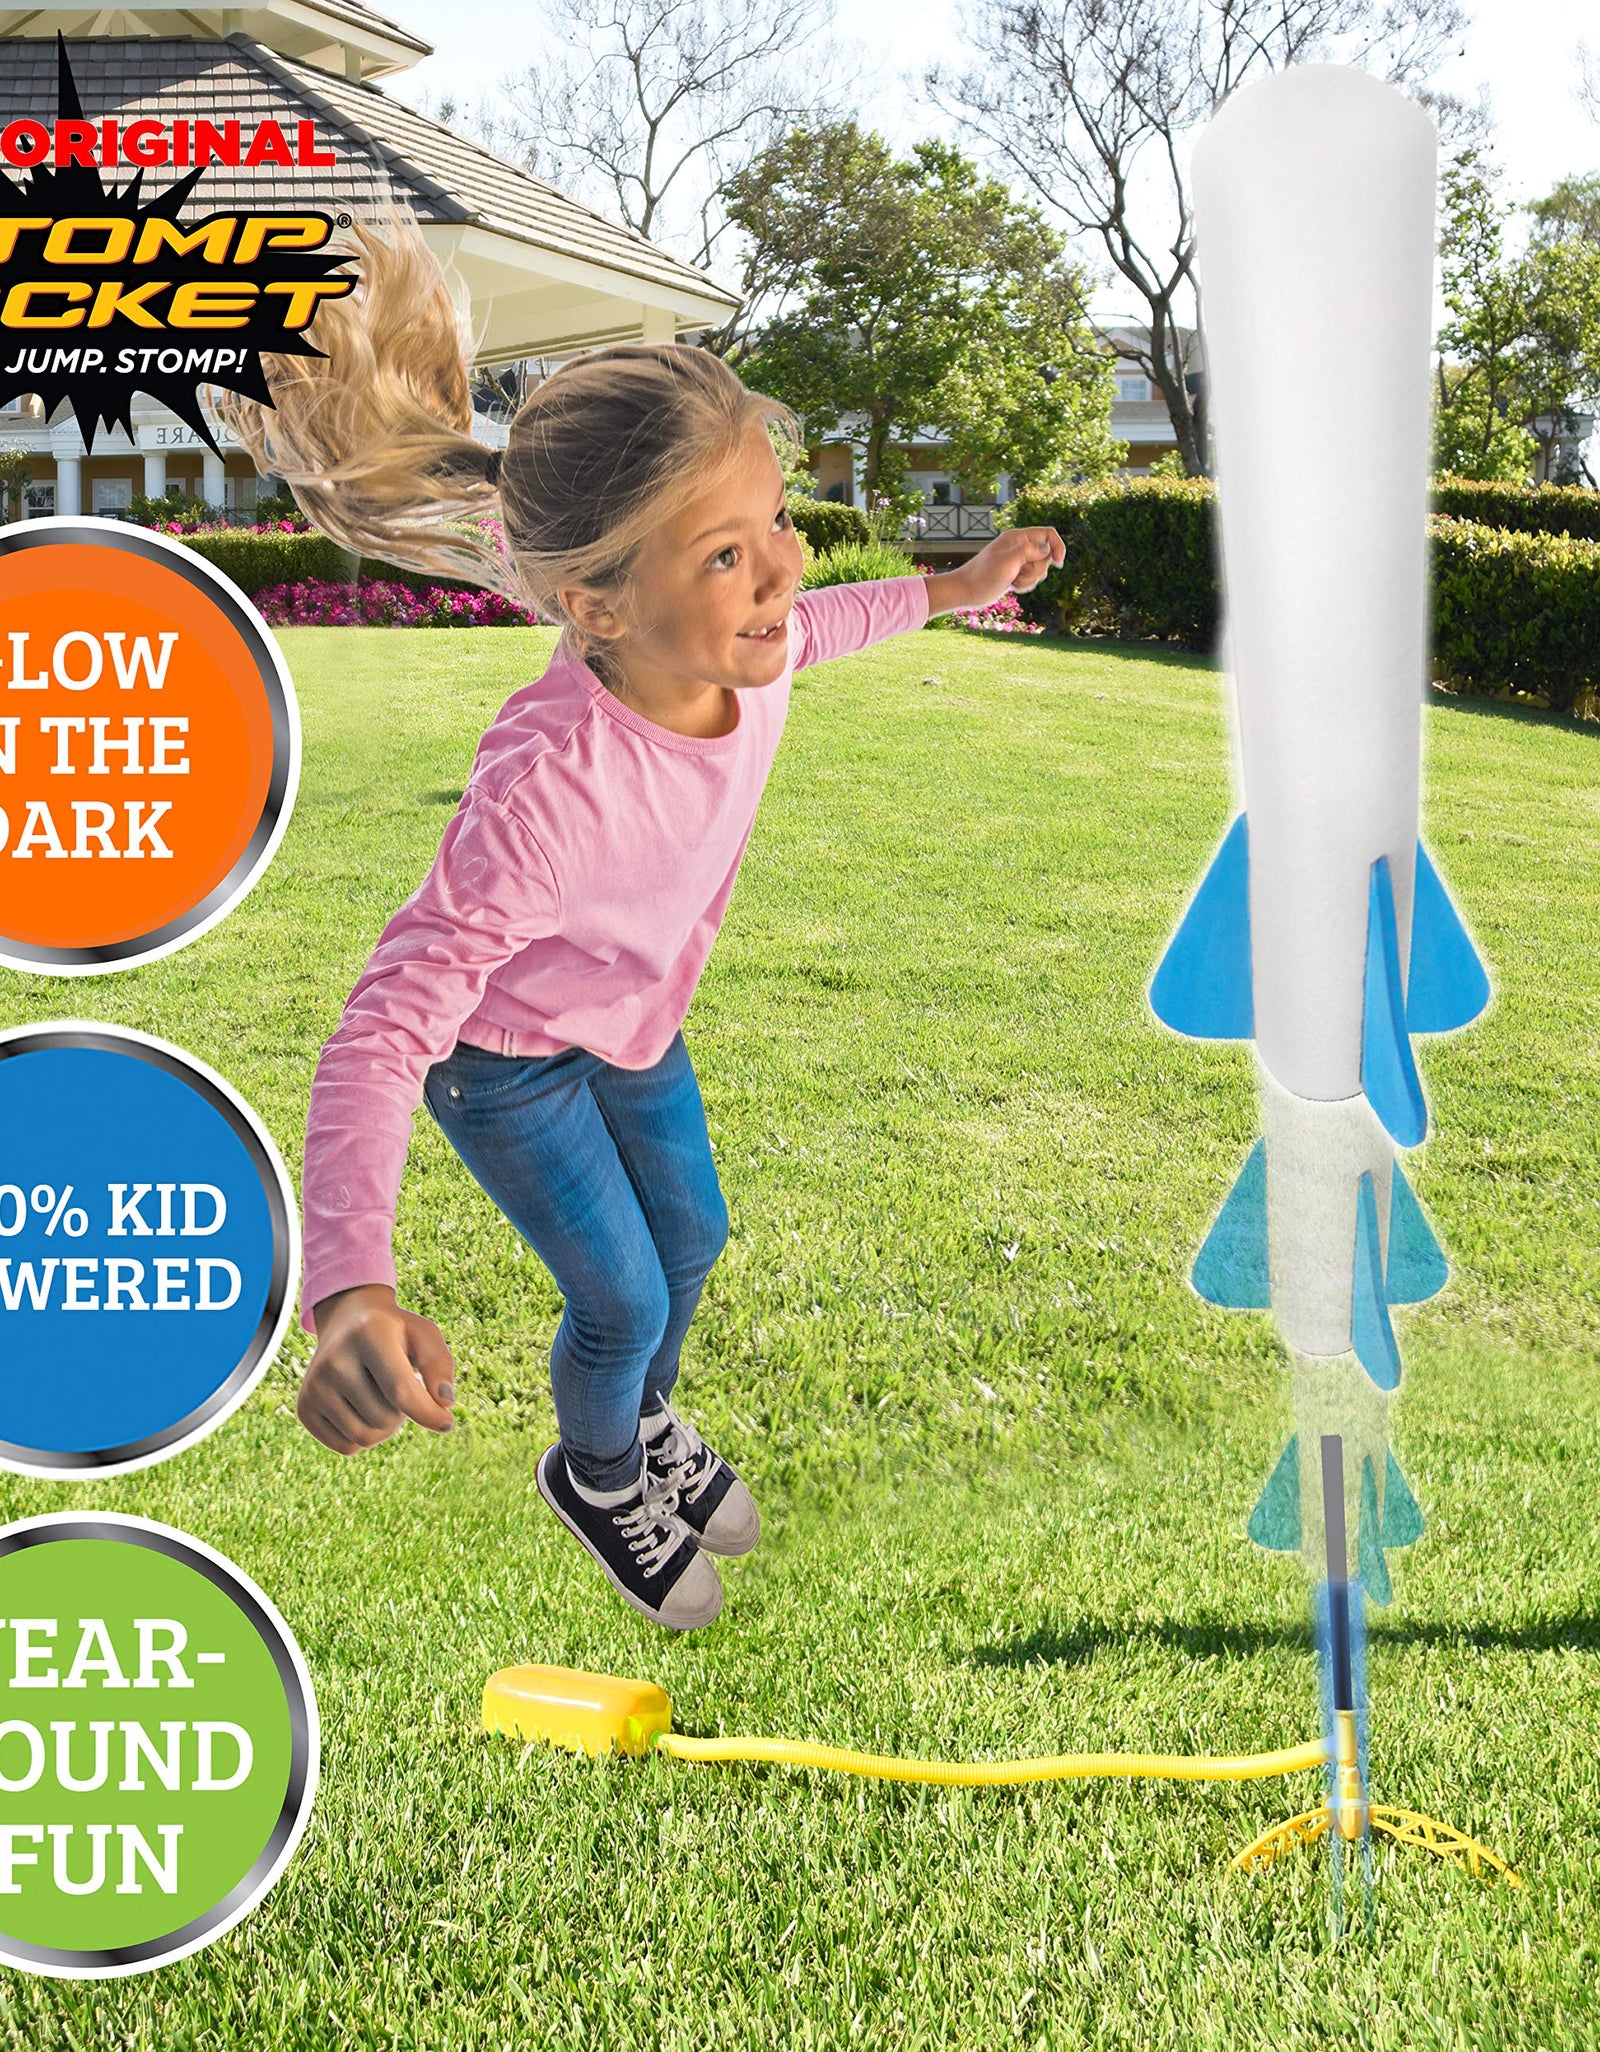 Stomp Rocket The Original Jr. Glow Rocket Launcher, 4 Foam Rockets and Toy Air Rocket Launcher - Glows in The Dark, STEM Gift for Boys and Girls Ages 3 Years and Up - Great for Year Round Play